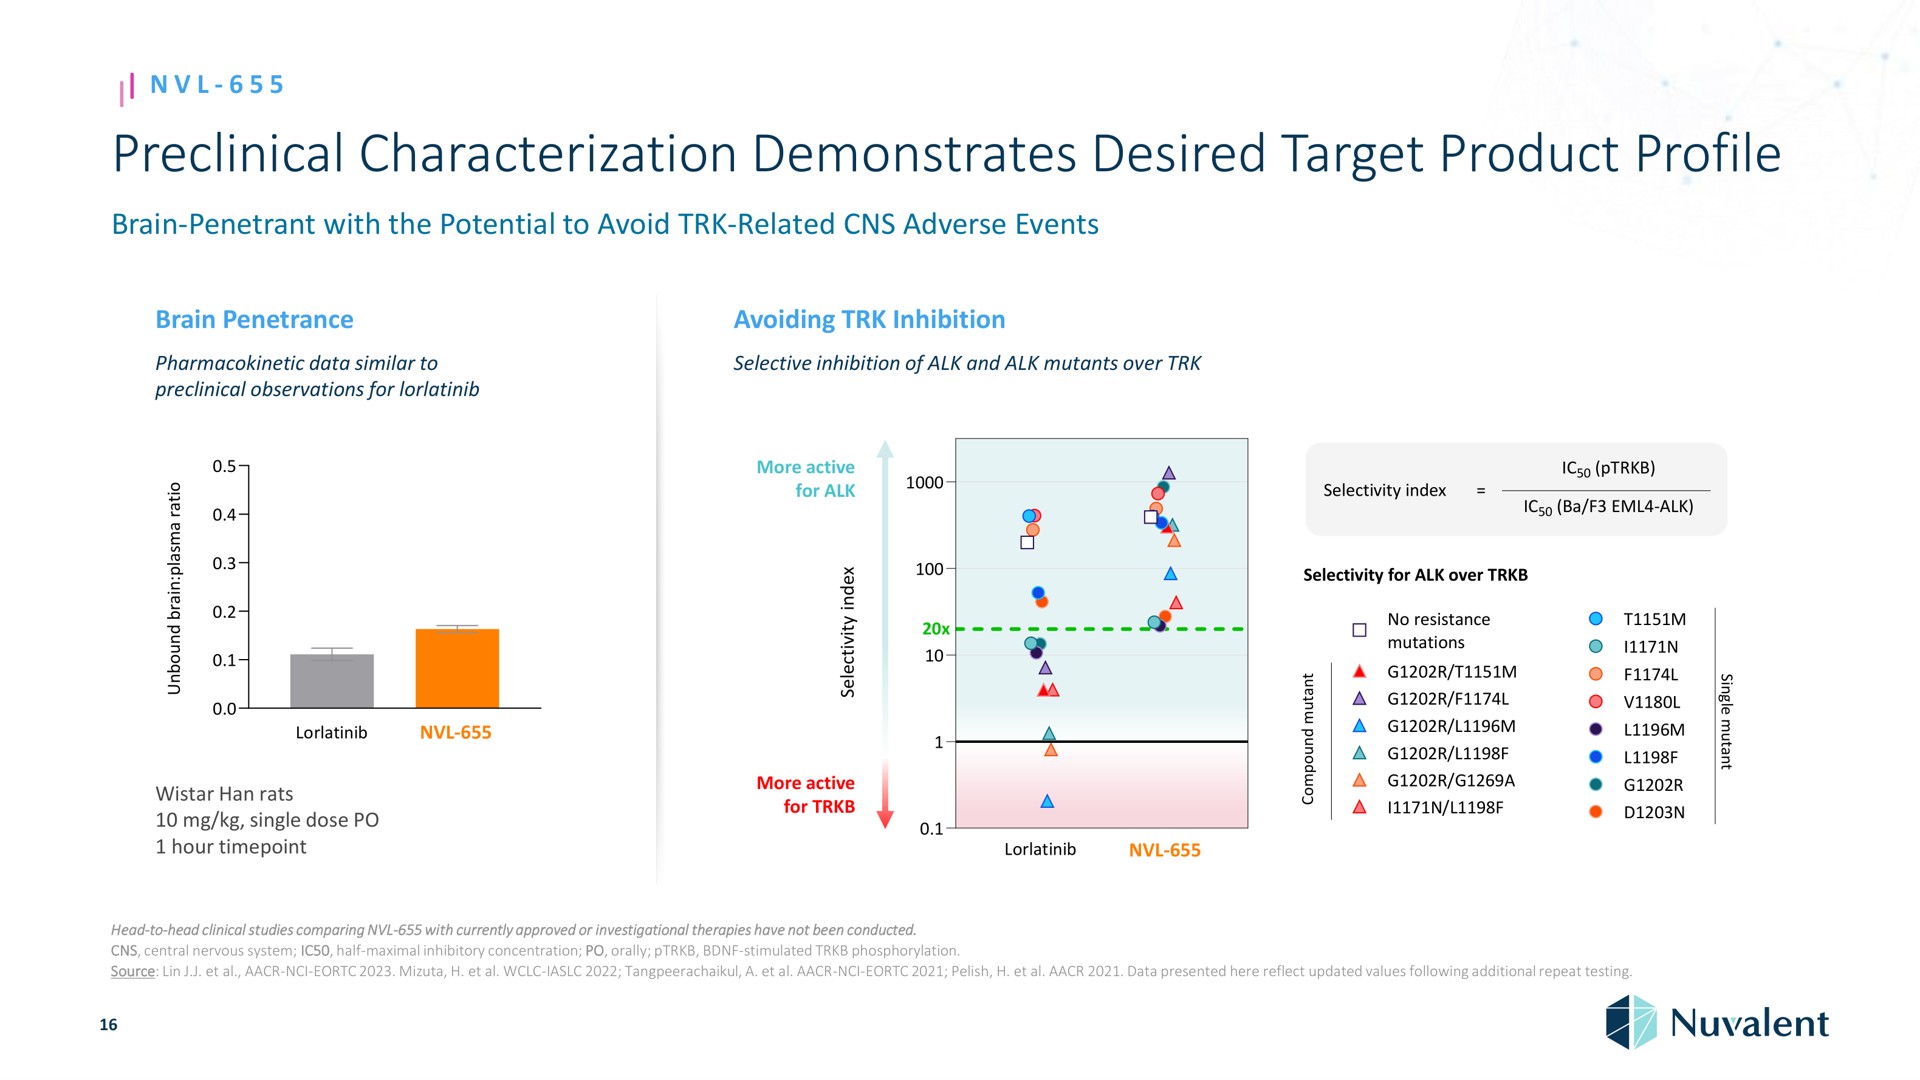 preclinical characterization demonstrates desired target product profile brain penetrant with the potential to avoid related adverse events brain penetrance avoiding inhibition data similar to observations for selective inhibition of alk and alk mutants over i a a a i a han rats single dose hour more active for alk more active for a a a a in a selectivity index alk selectivity for alk over no resistance mutations a a a head to head clinical studies comparing with currently approved or investigational therapies have not been conducted central nervous system half maximal inhibitory concentration orally stimulated phosphorylation source lin a data presented here reflect updated values following additional repeat testing | Nuvalent